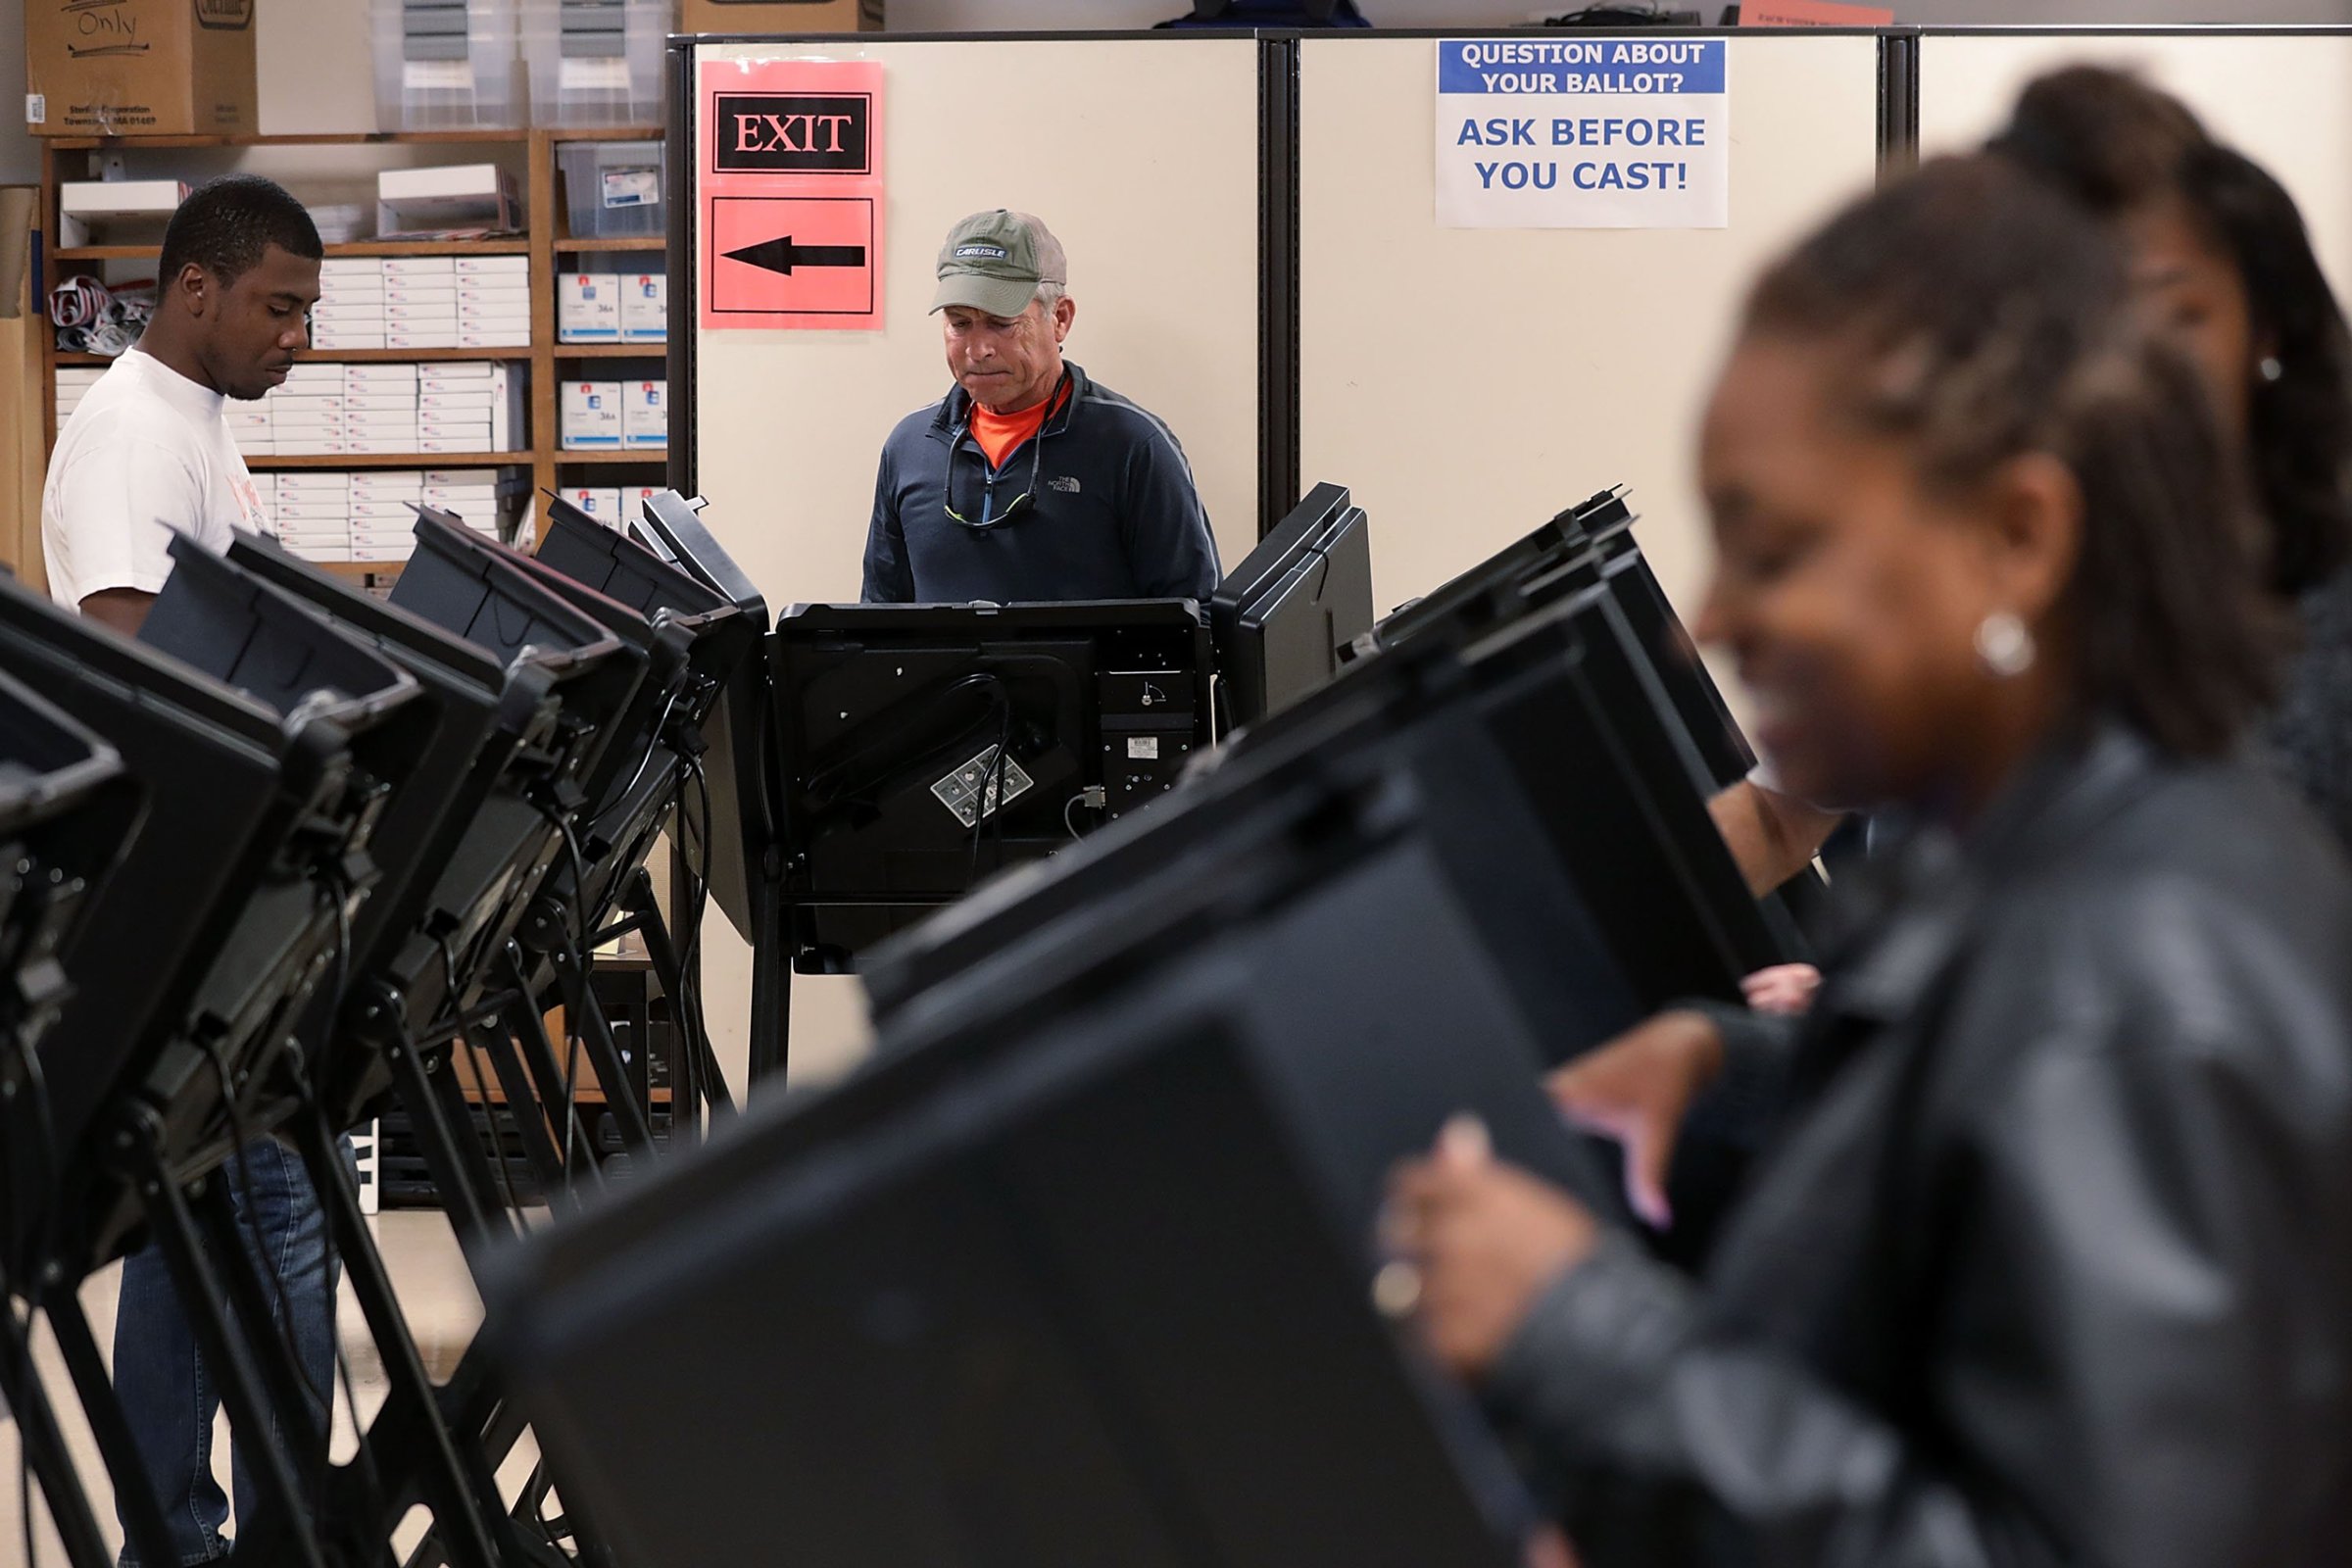 WINSTON-SALEM, NC - OCTOBER 28: Voters cast their ballots during early voting for the 2016 general election at Forsyth County Government Center October 28, 2016 in Winston-Salem, North Carolina. Early voting has begun in North Carolina through November 5. (Photo by Alex Wong/Getty Images)